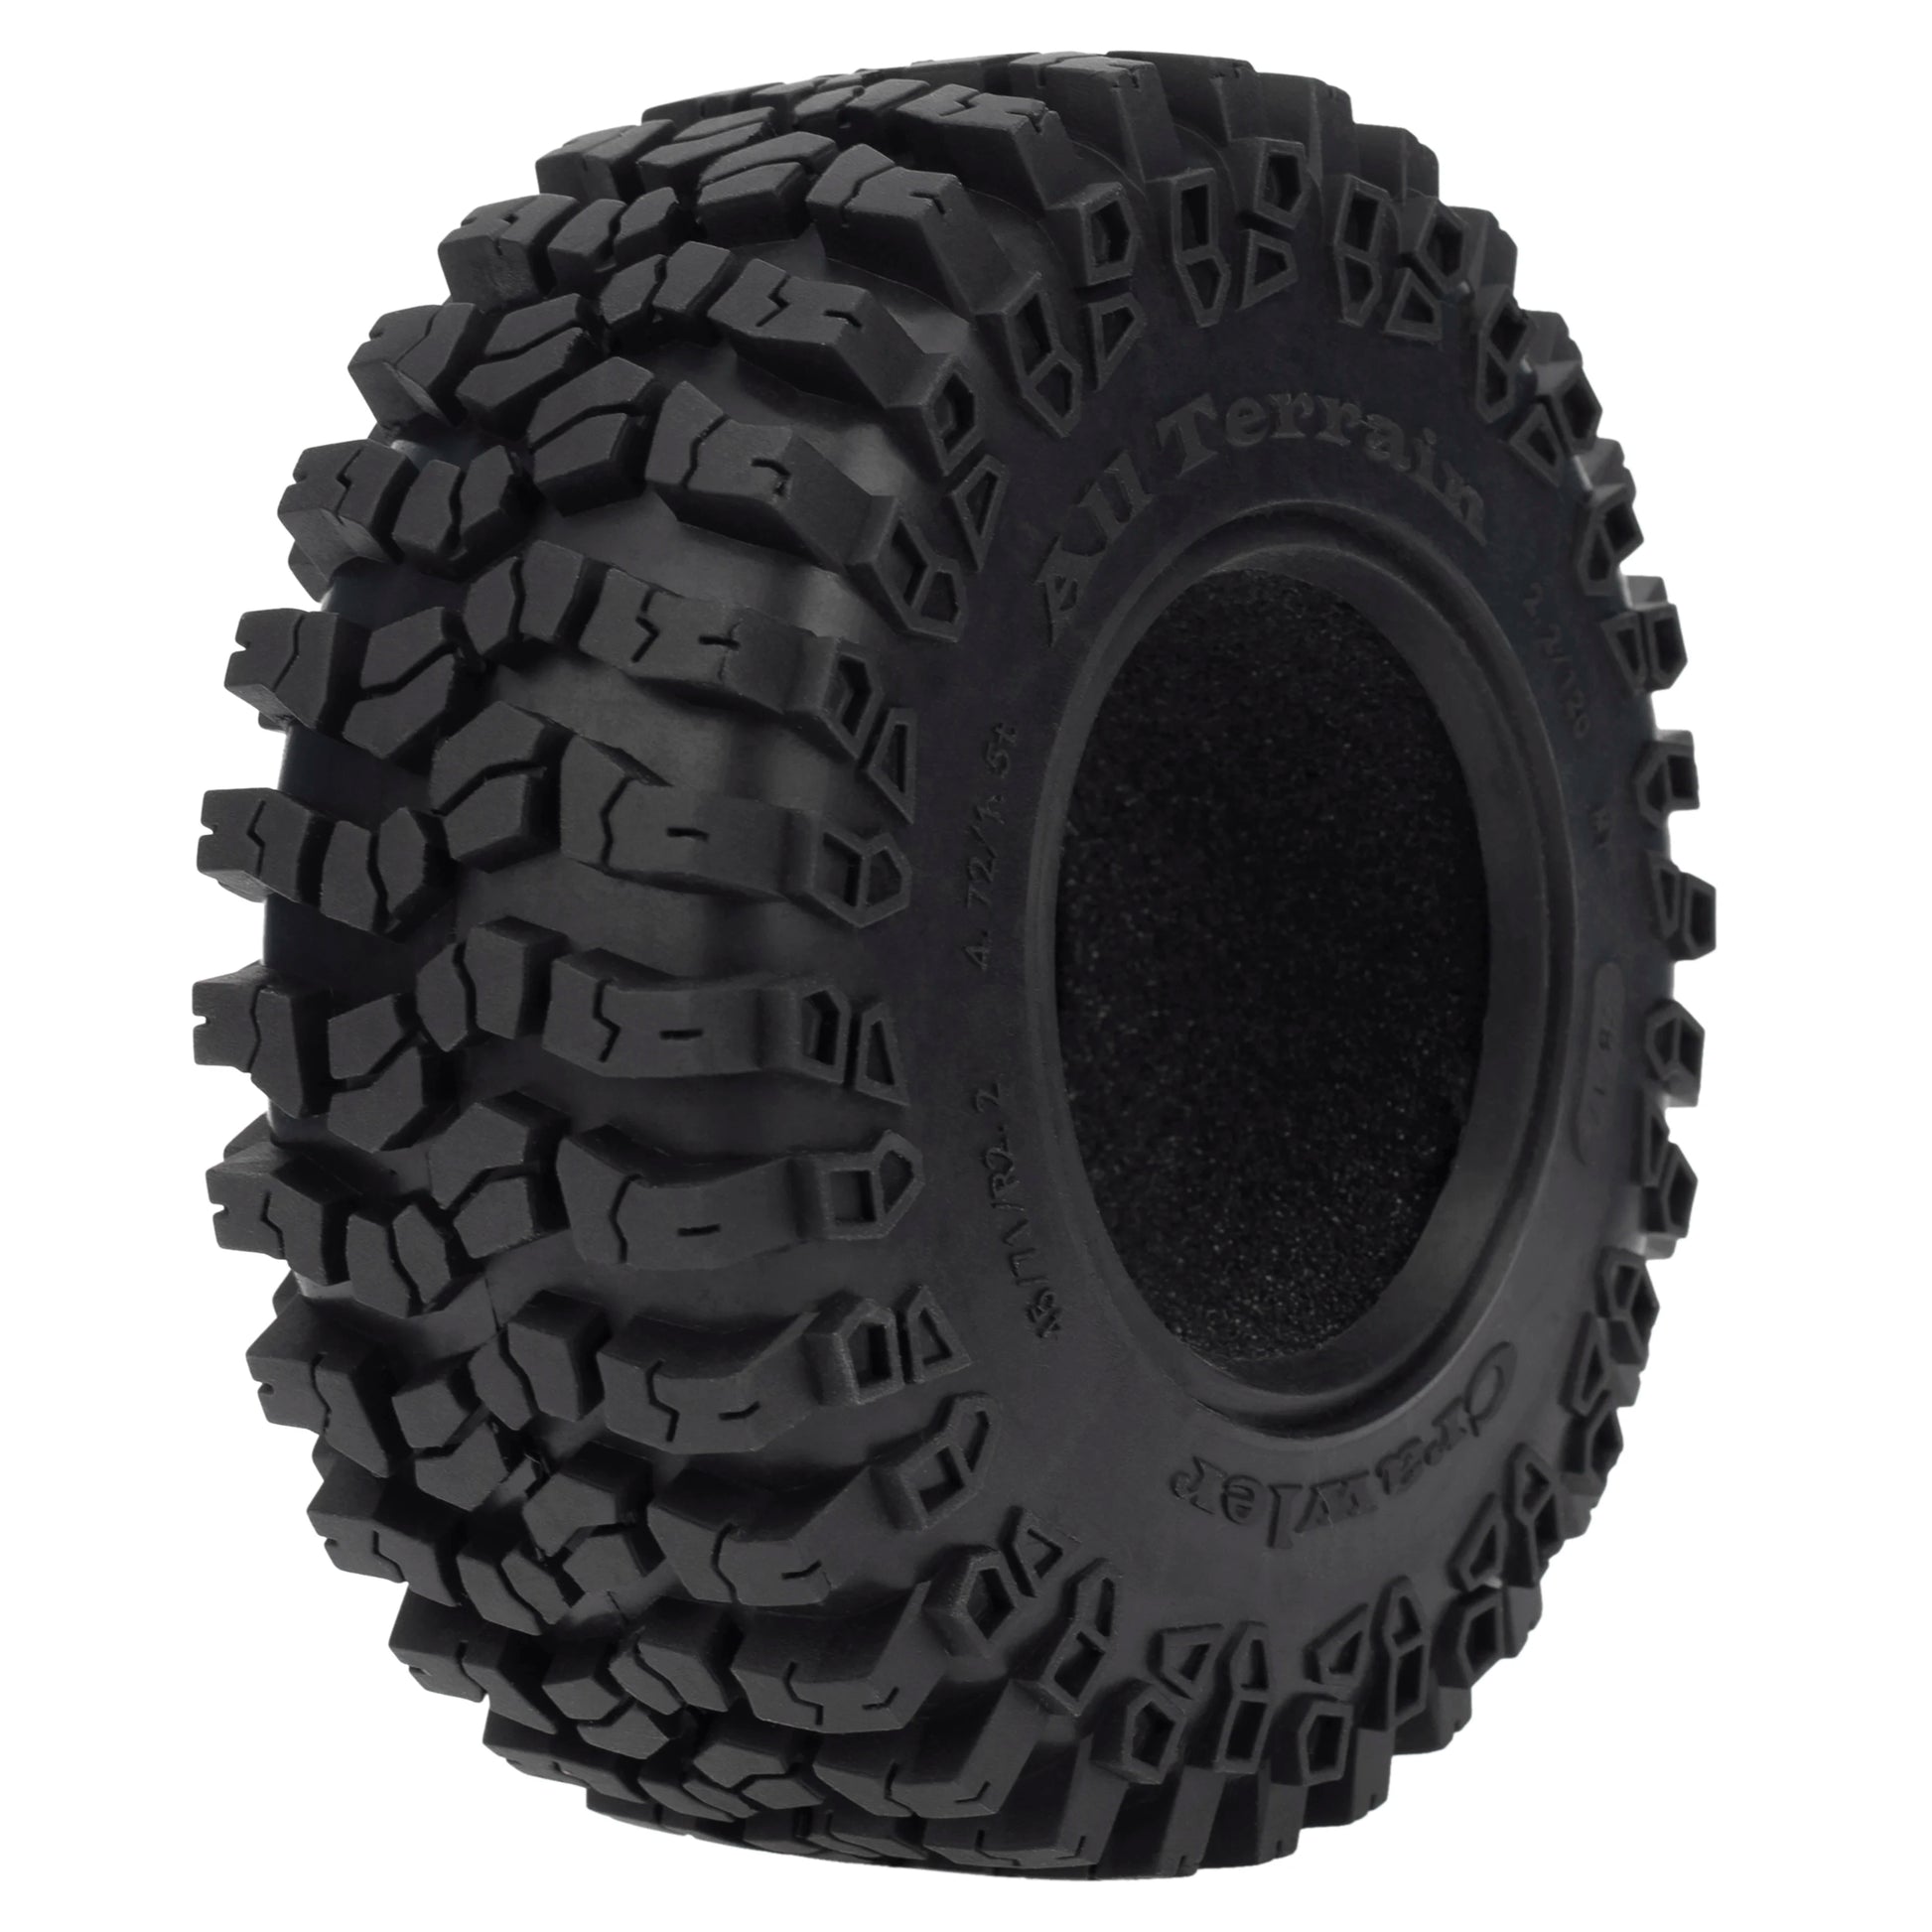 4.72inch RC Rubber Tires for SCX10 SCX10 II